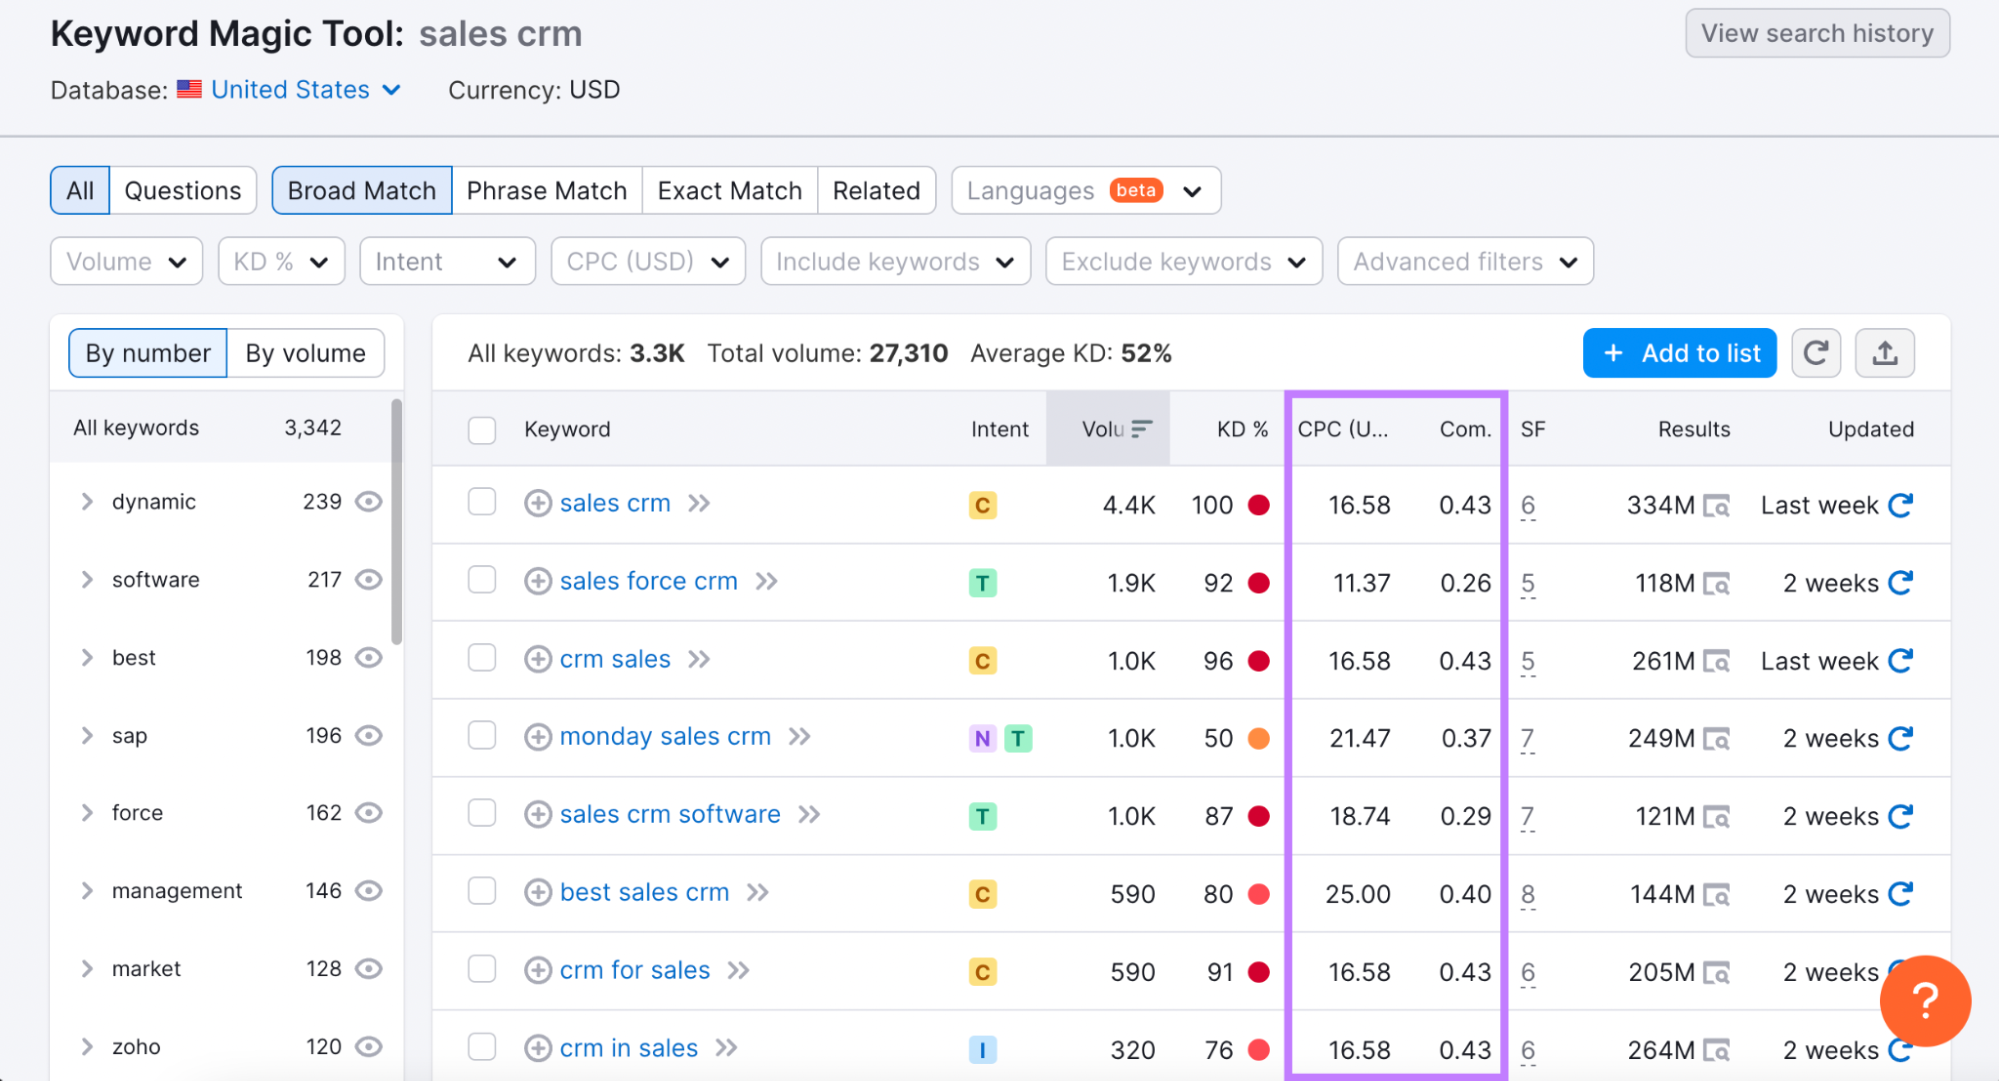 Keyword Magic Tool results for "sales crm" with an "CPC" and "Com." columns highlighted